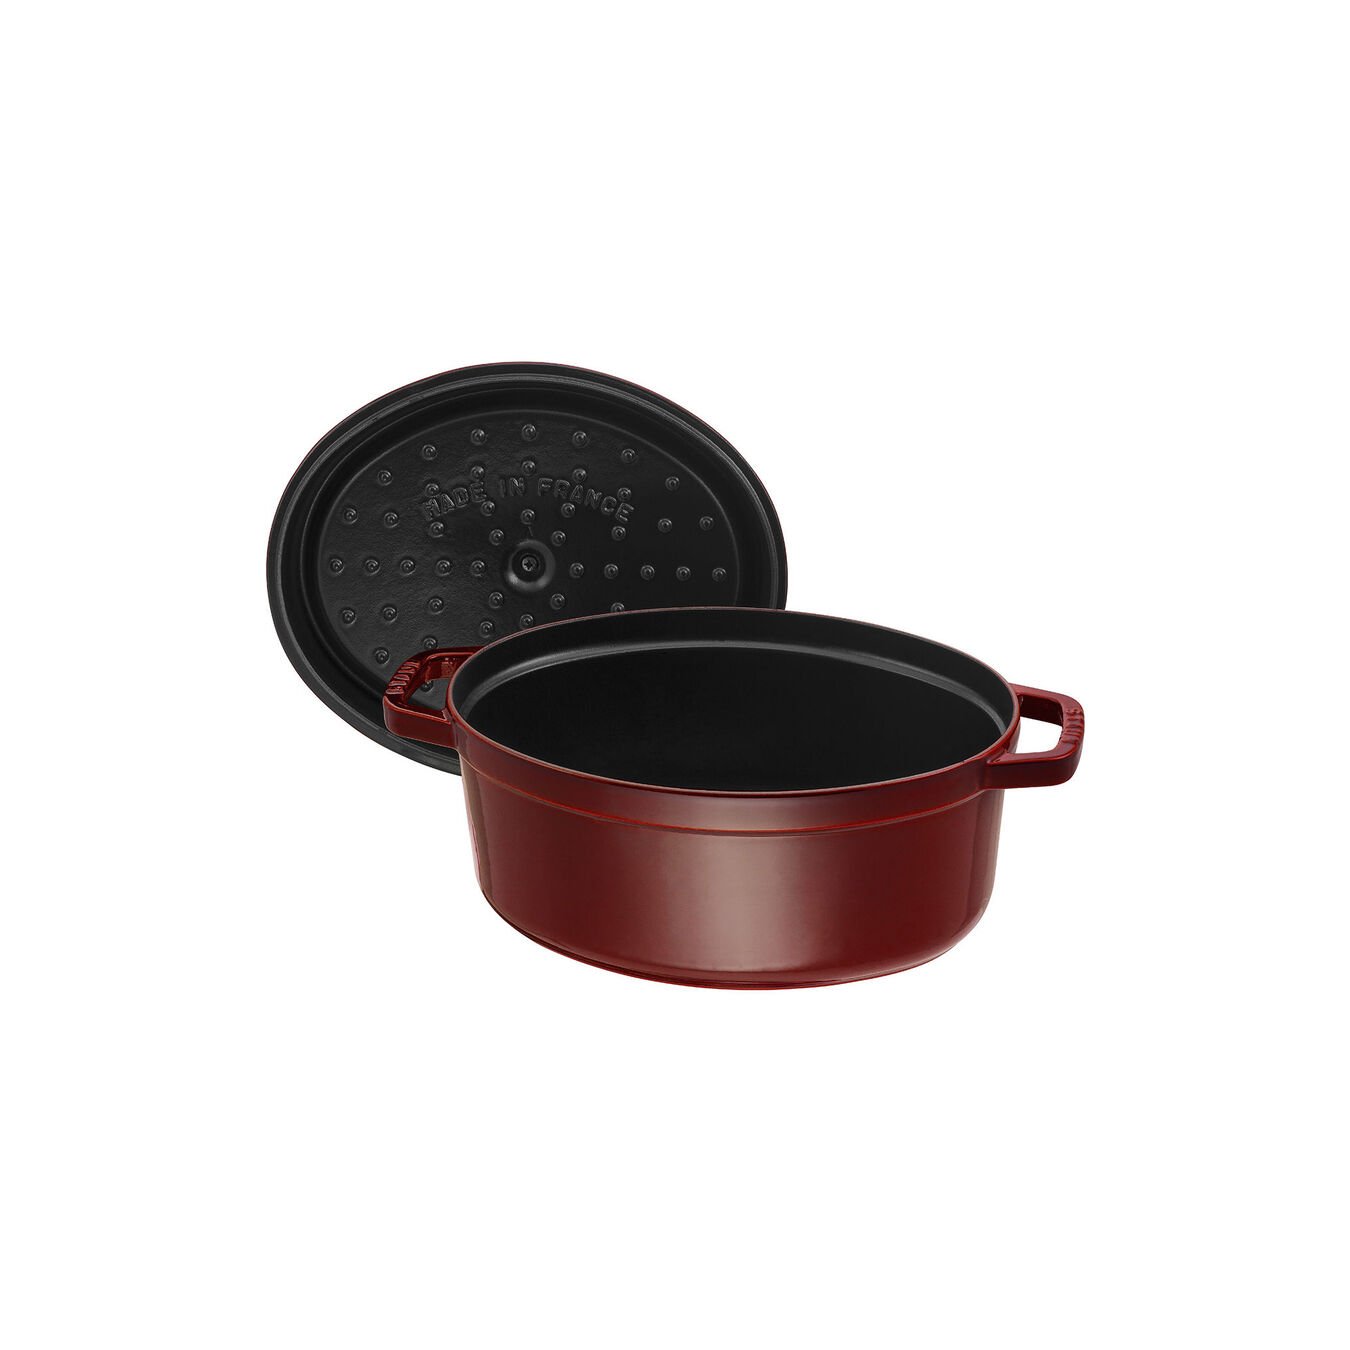 4.25 l cast iron oval Cocotte, grenadine-red,,large 5